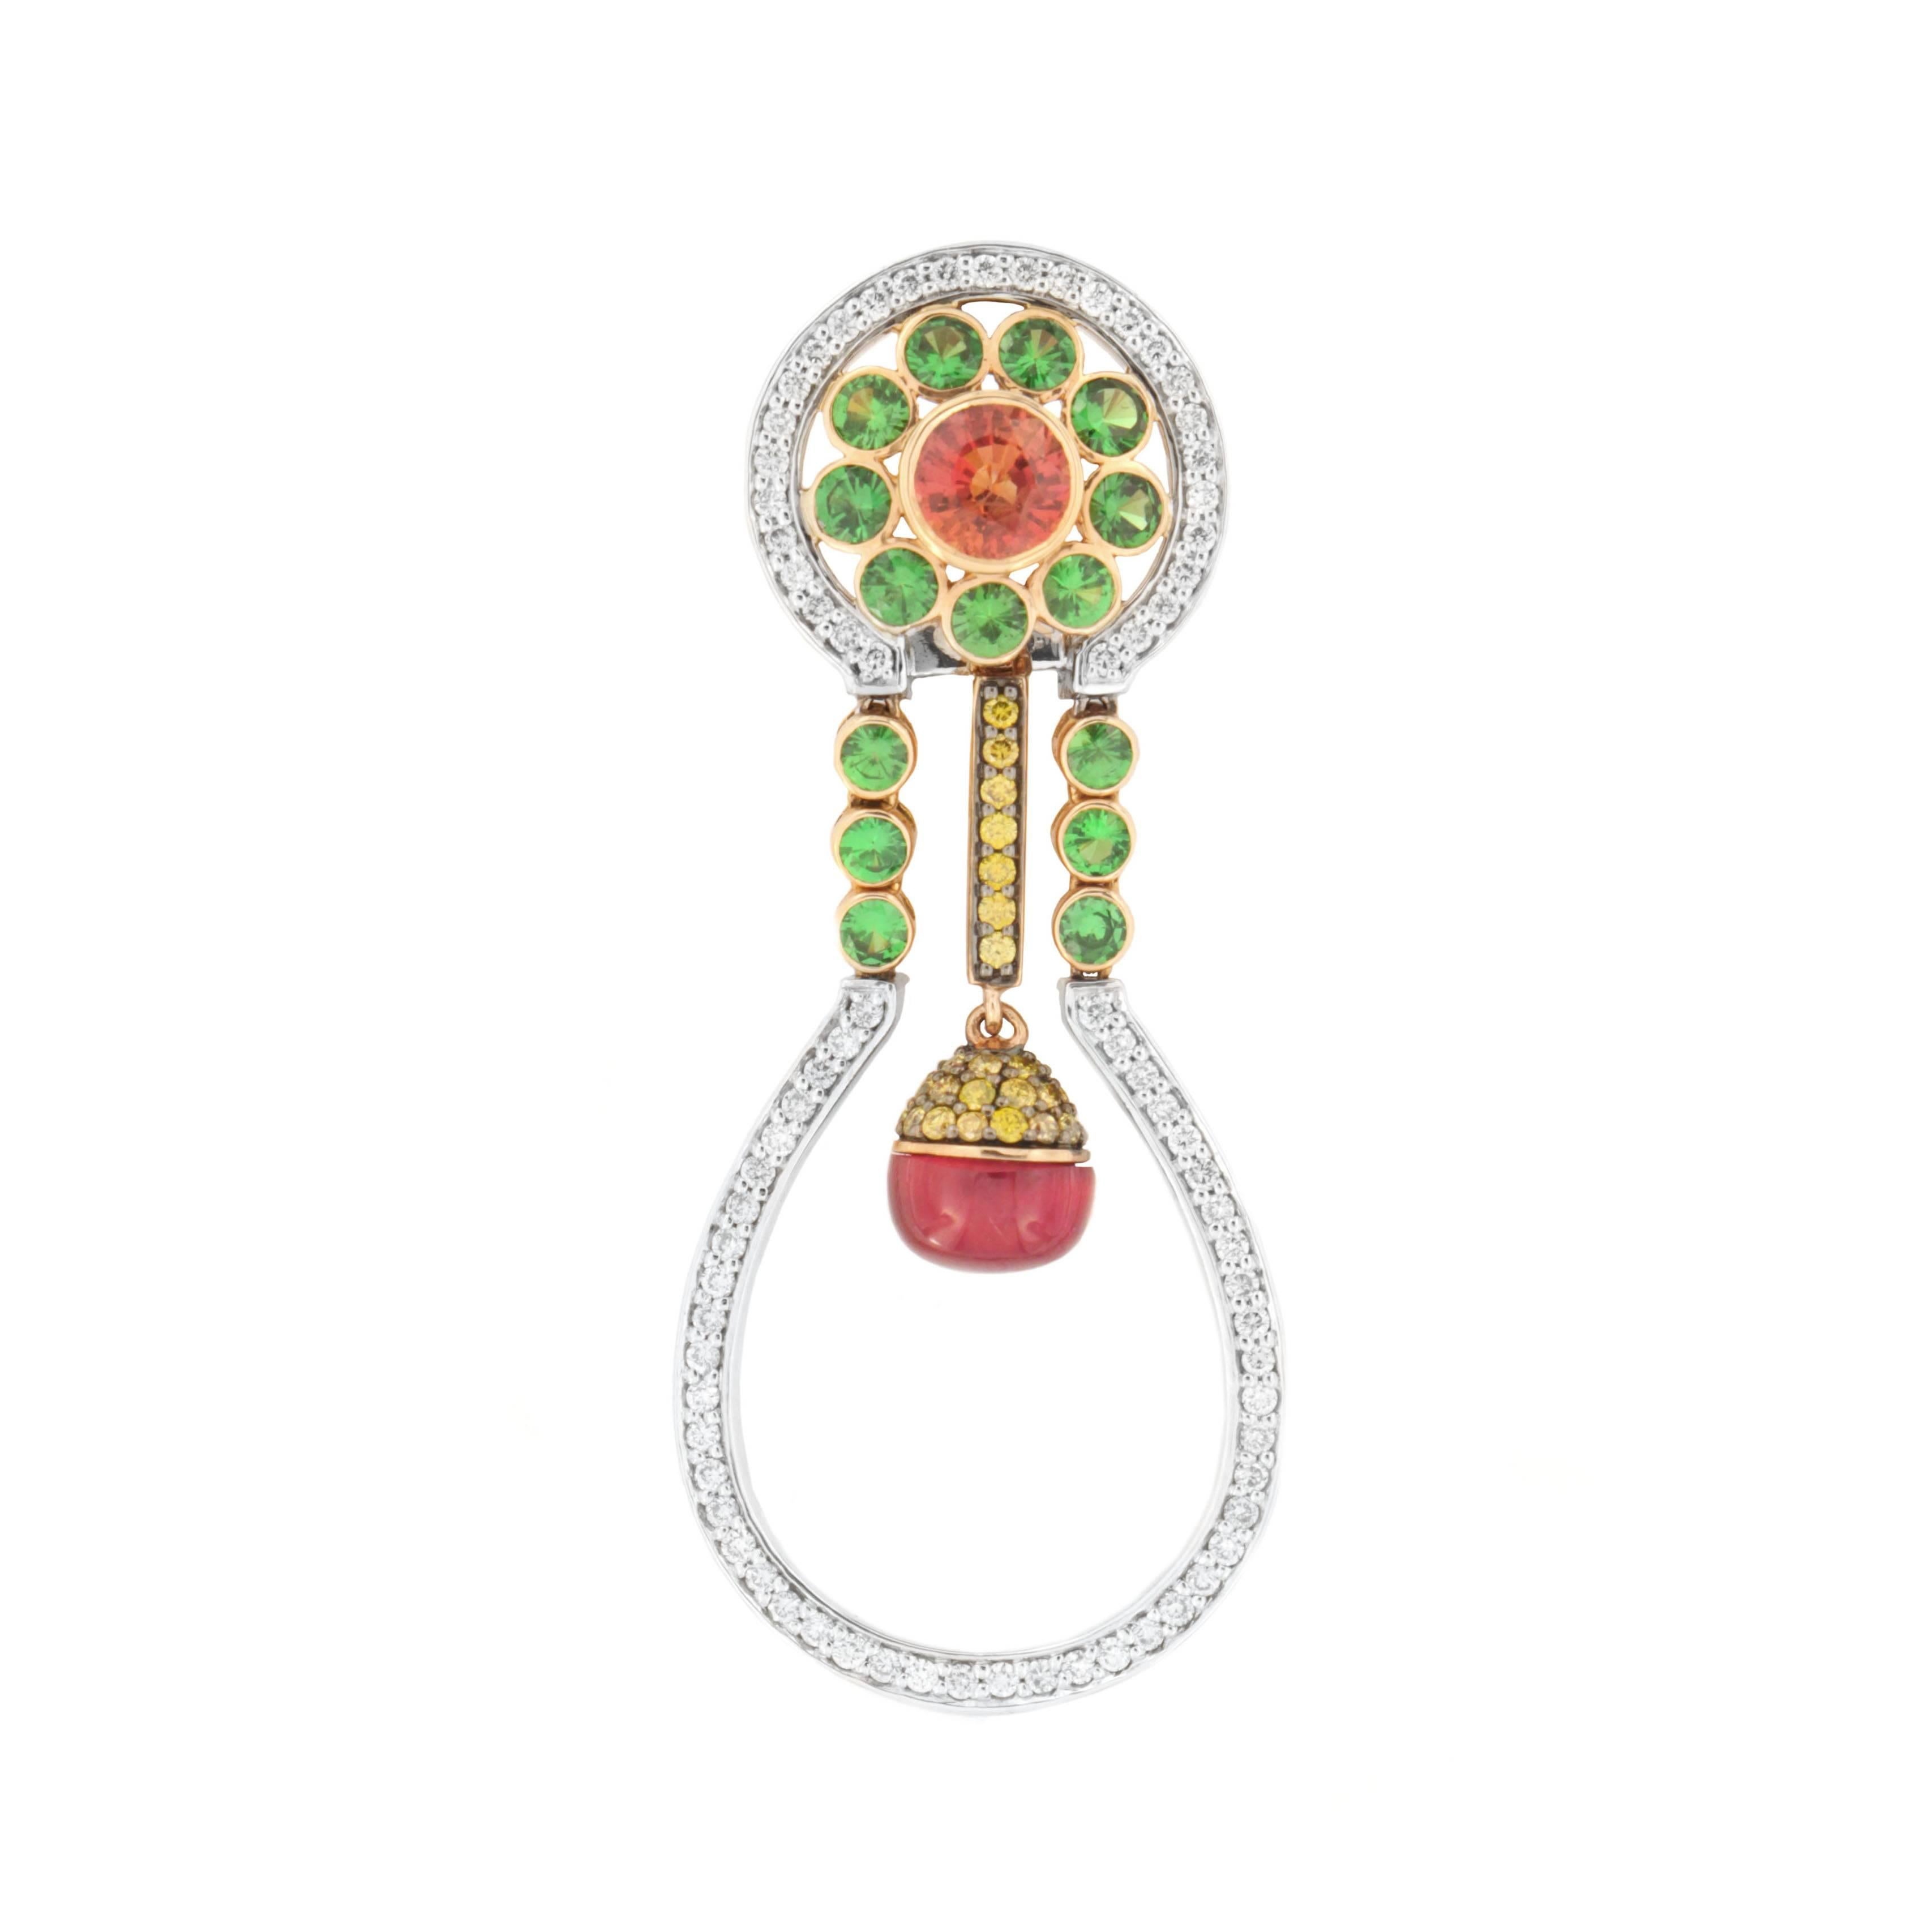 A striking mix of colors and shapes in this daring Zorab drop earring with a Ruby (3.74 Carats) dangle. This one-of-a-kind masterpiece is outlined with 0.93 Carats of White Diamonds, enclosing 1.62 Carats of Pink Sapphires, 1.97 Carats of Tsavorite